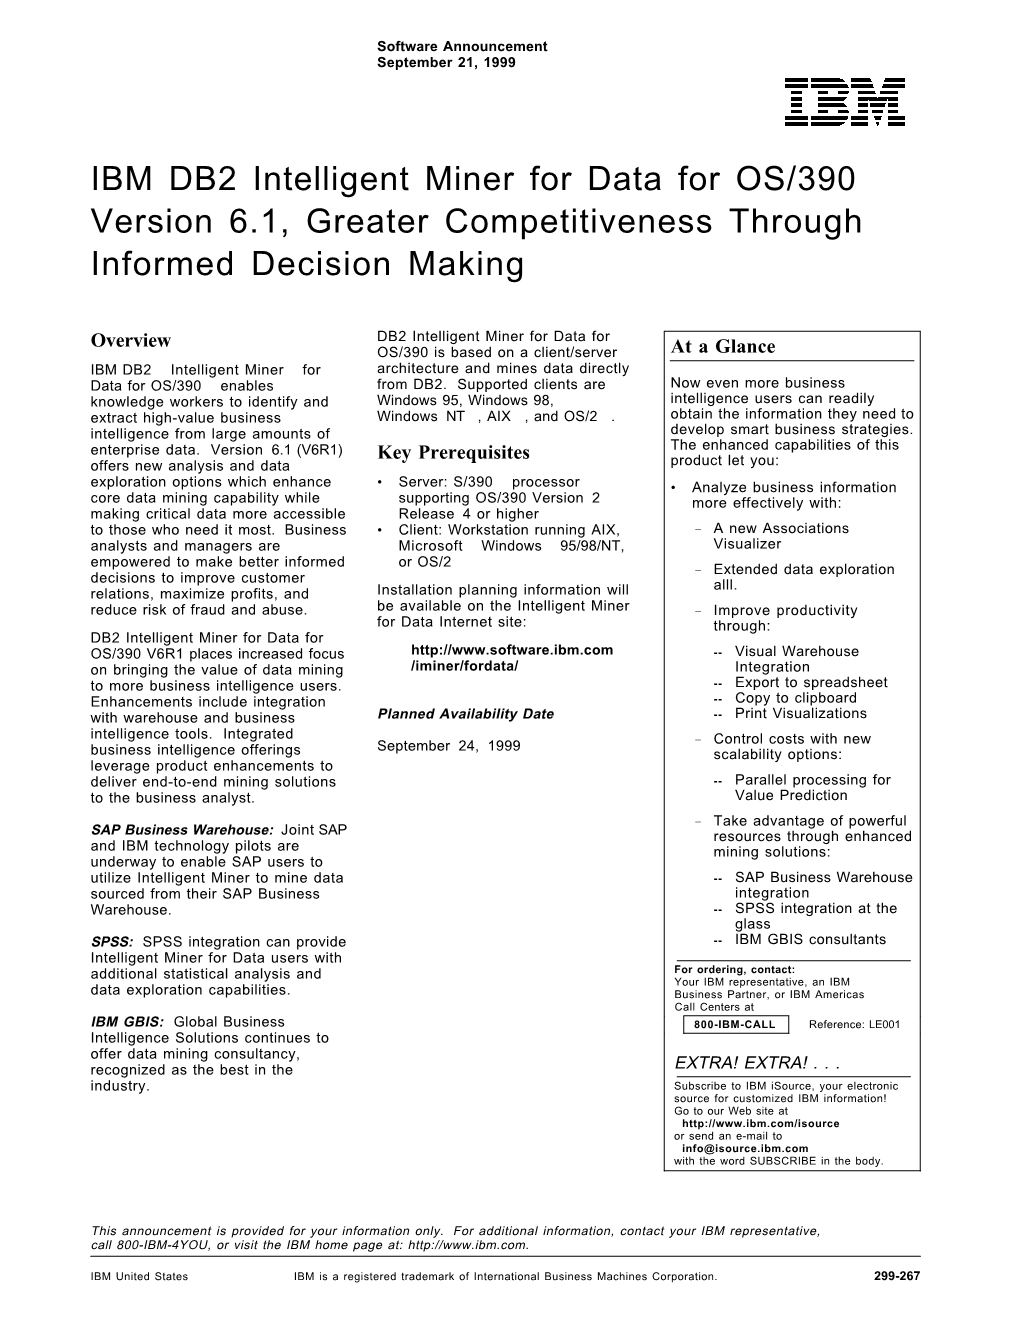 IBM DB2 Intelligent Miner for Data for OS/390 Version 6.1, Greater Competitiveness Through Informed Decision Making